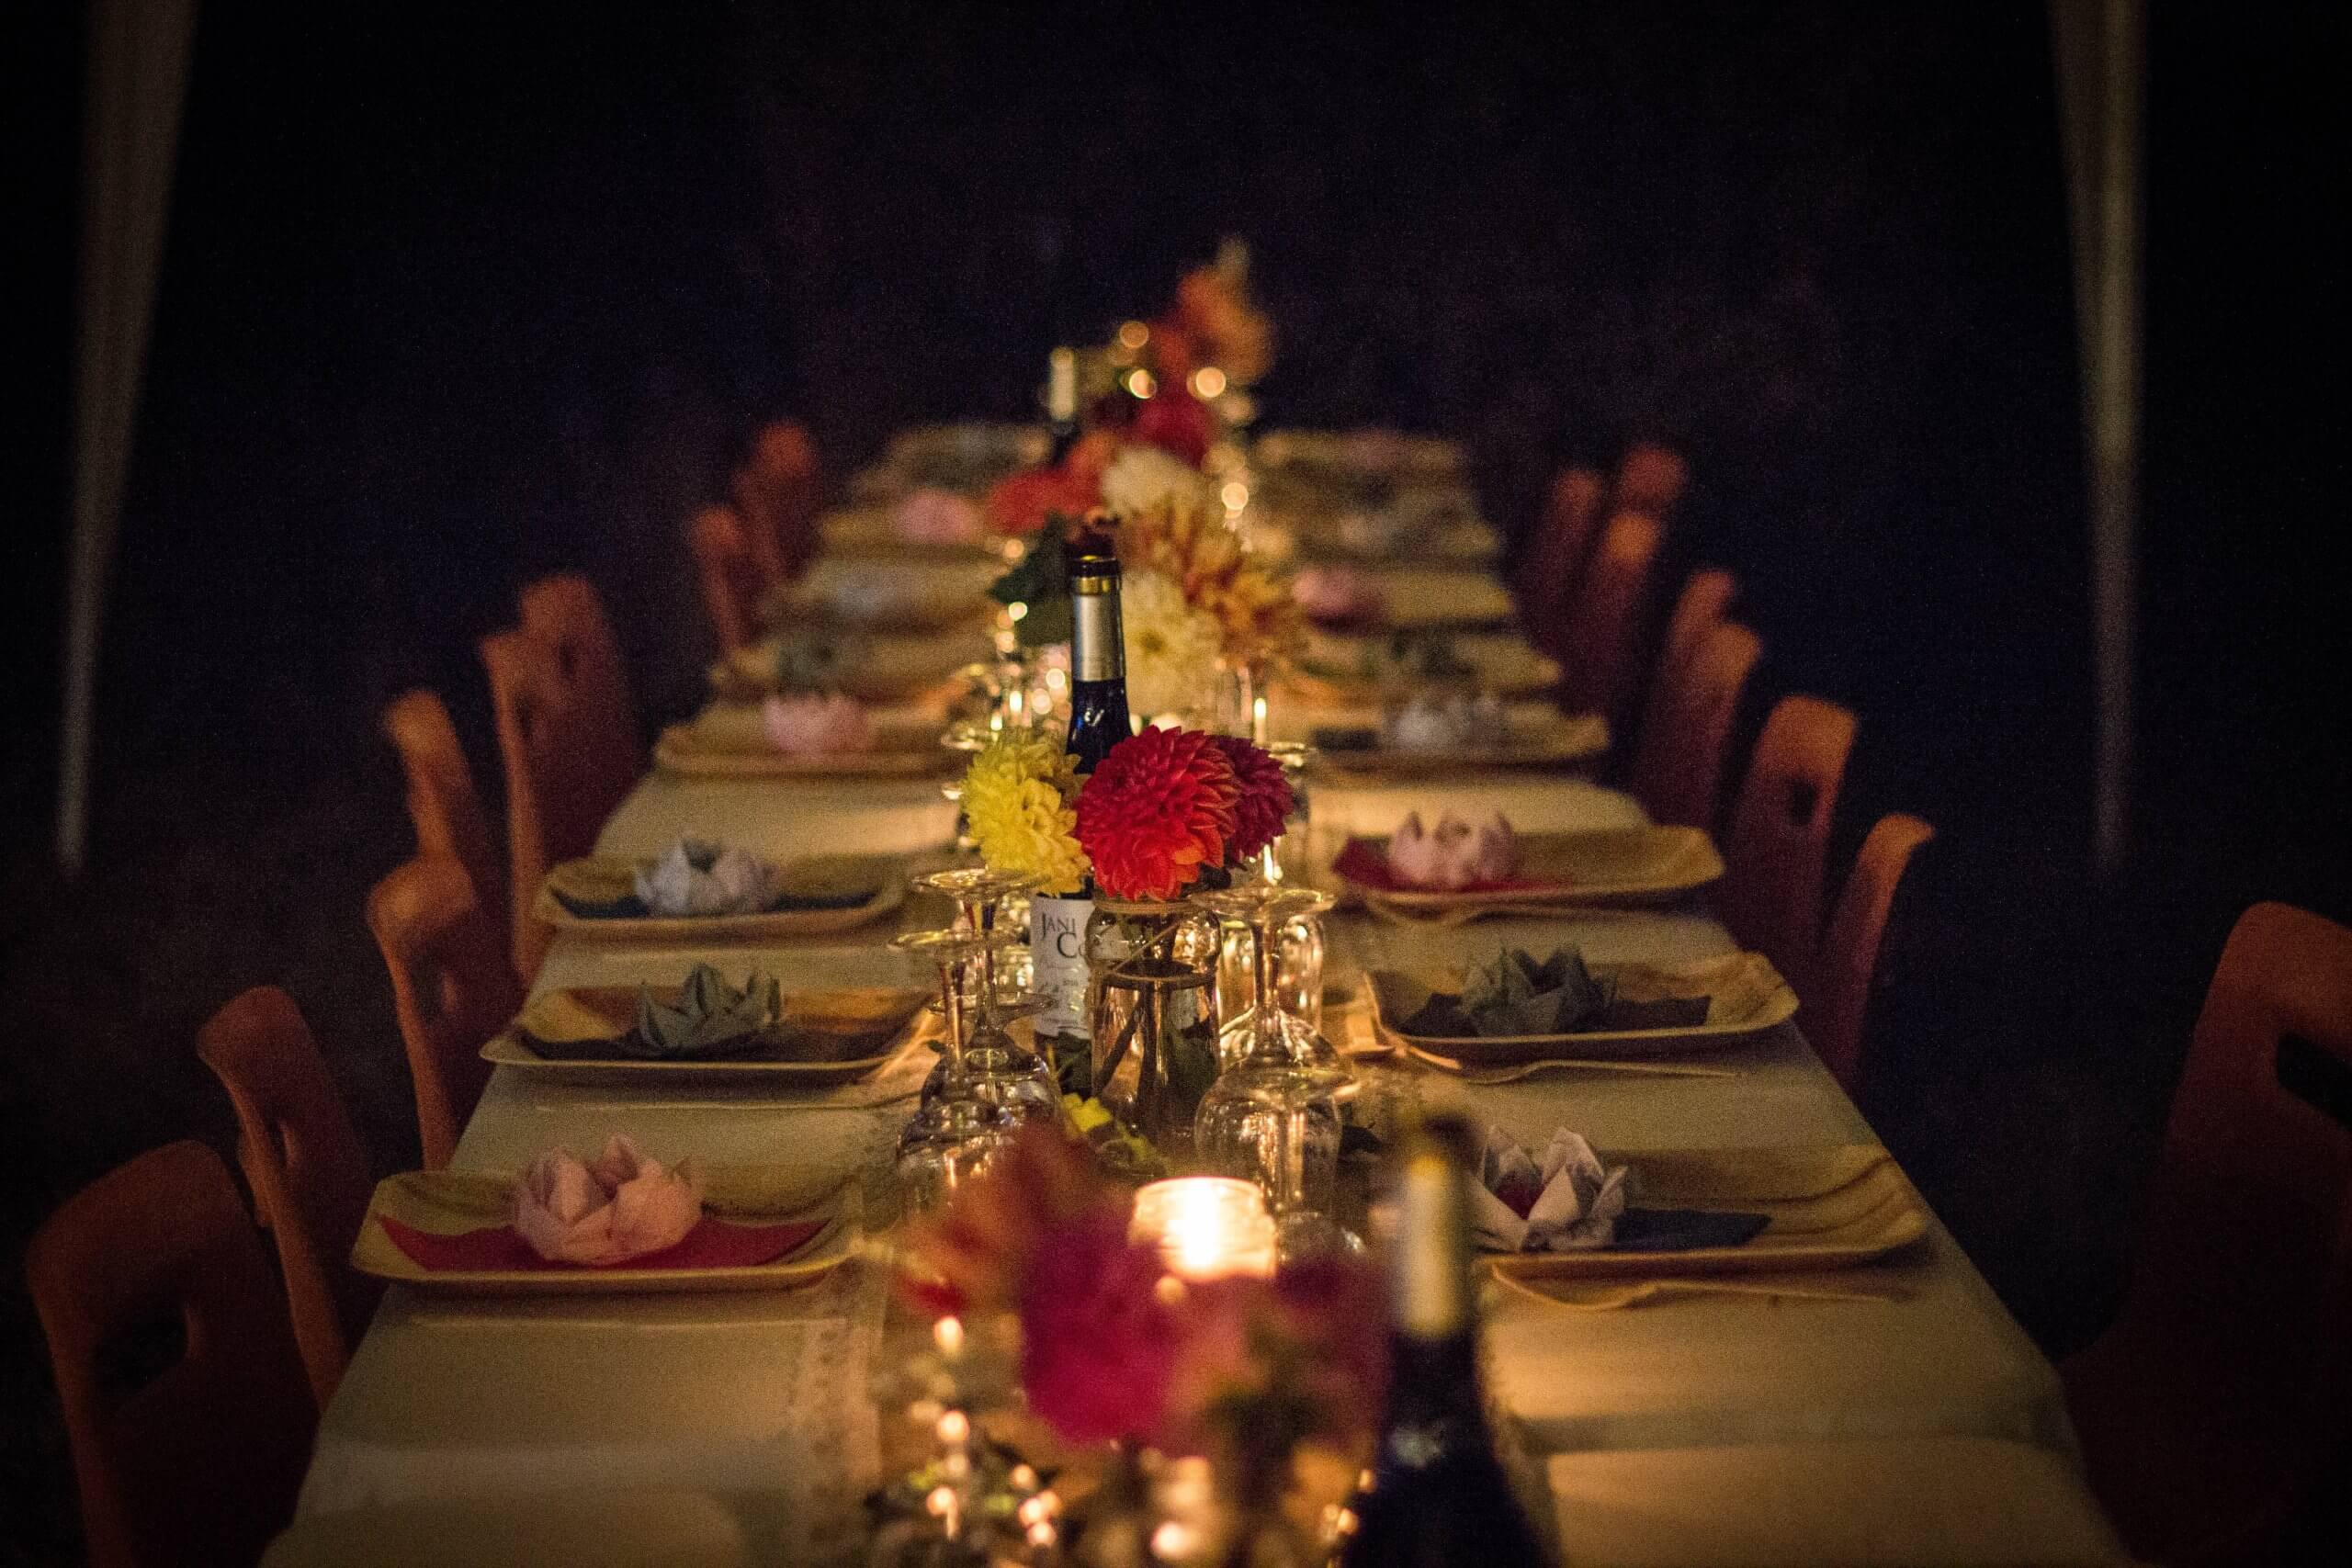 A candlelit table with rows of place settings